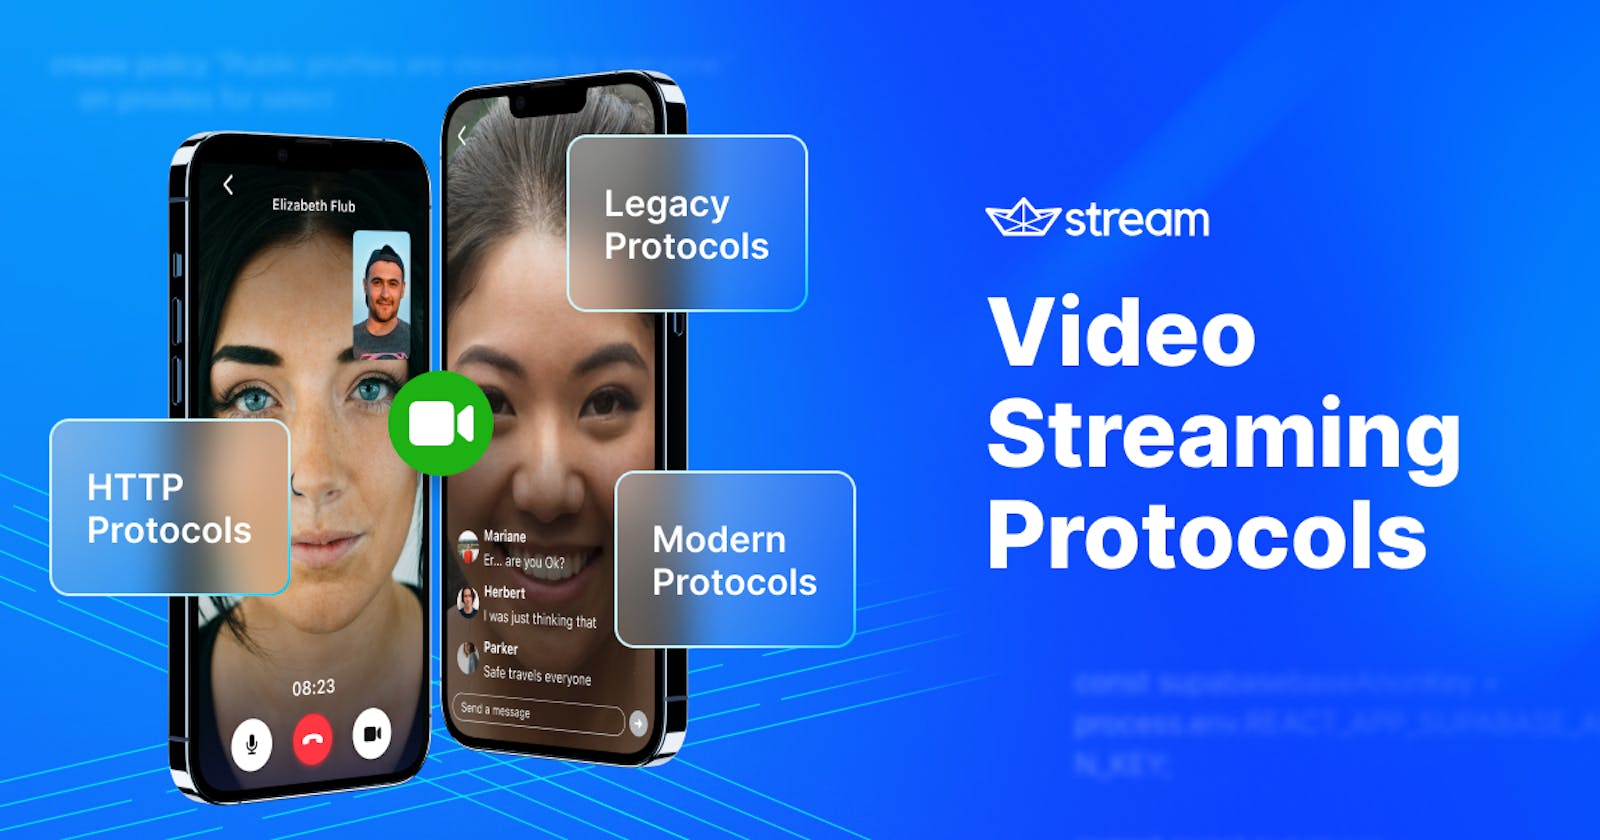 Video Streaming Protocols: What Are They & How to Choose The Best One